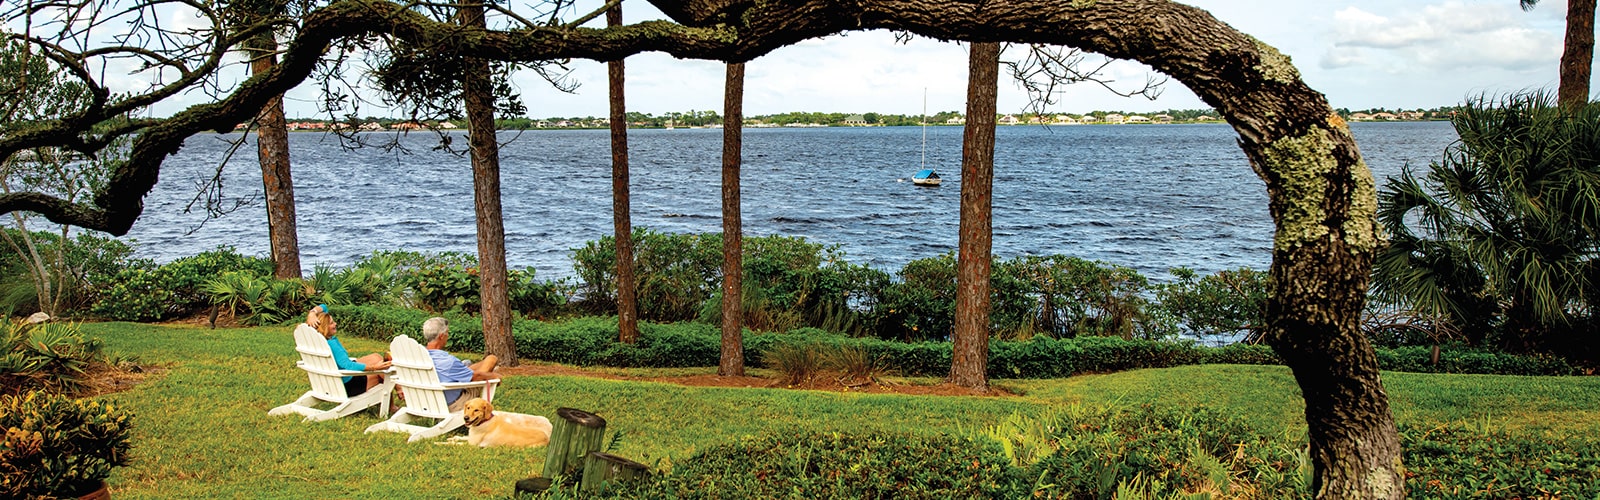 6 Images That Tell the Story of This Photo-Worthy Florida Golf Club Community